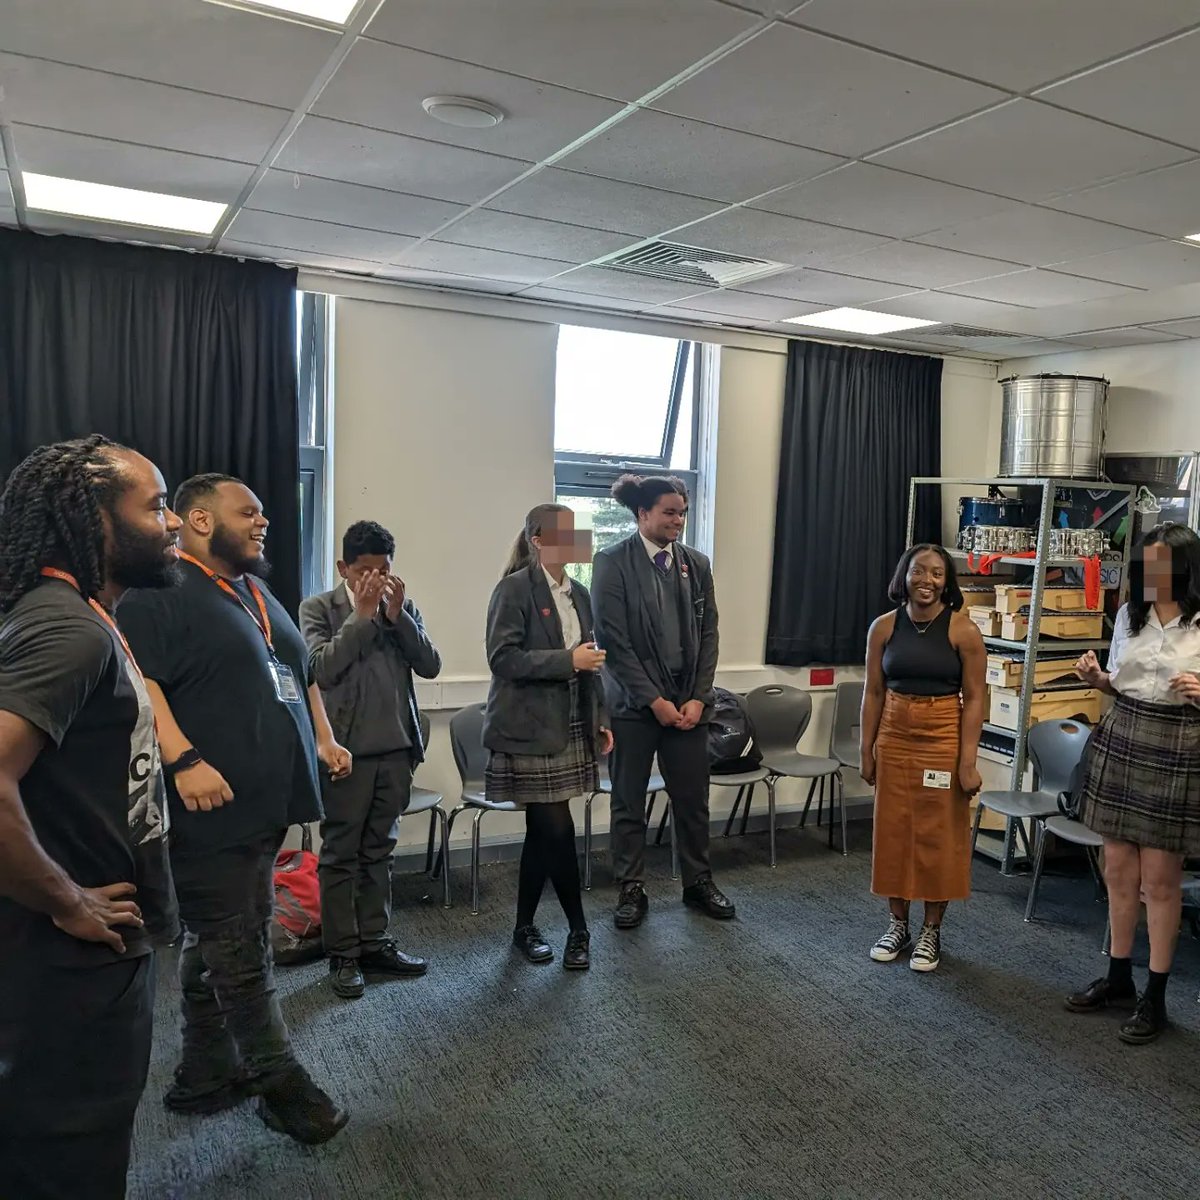 Ice breakers in the first session of our Producer Programme courtesy of George, Dami & Cameron from @GroundedSounds_ 🎤 Over the next 10 weeks these students will be coached in songwriting, production, vocal & recording skills. Can't wait to see what they create! #MusicMatters